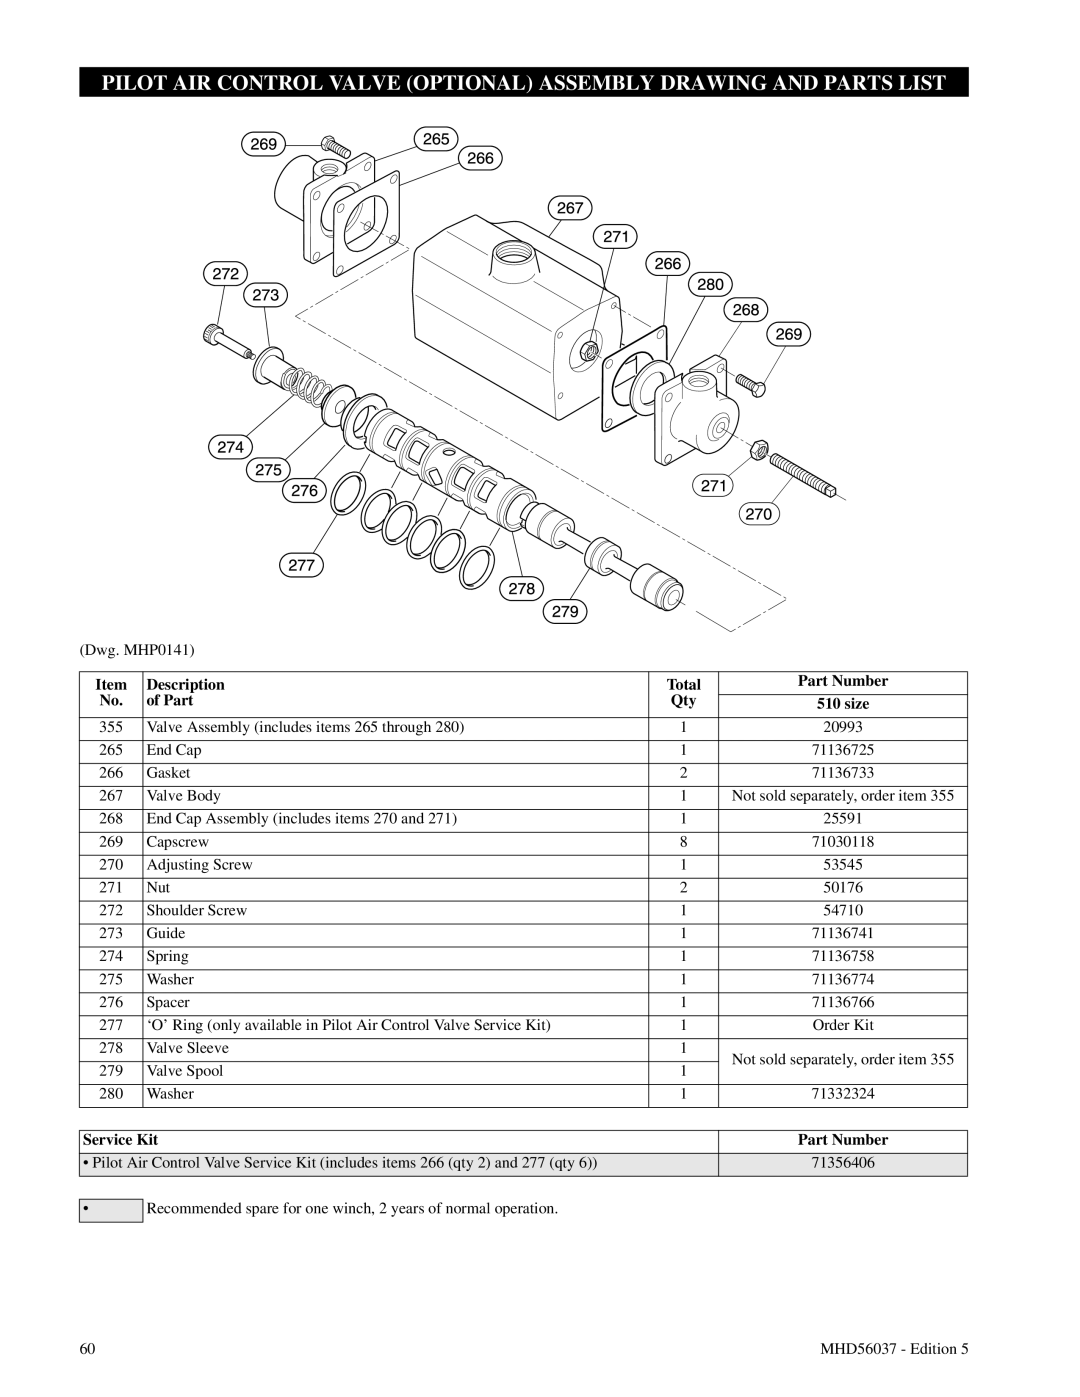 Ingersoll-Rand FA5 Pilot Air Control Valve Optional Assembly Drawing And Parts List, Description, Part Number, of Part 